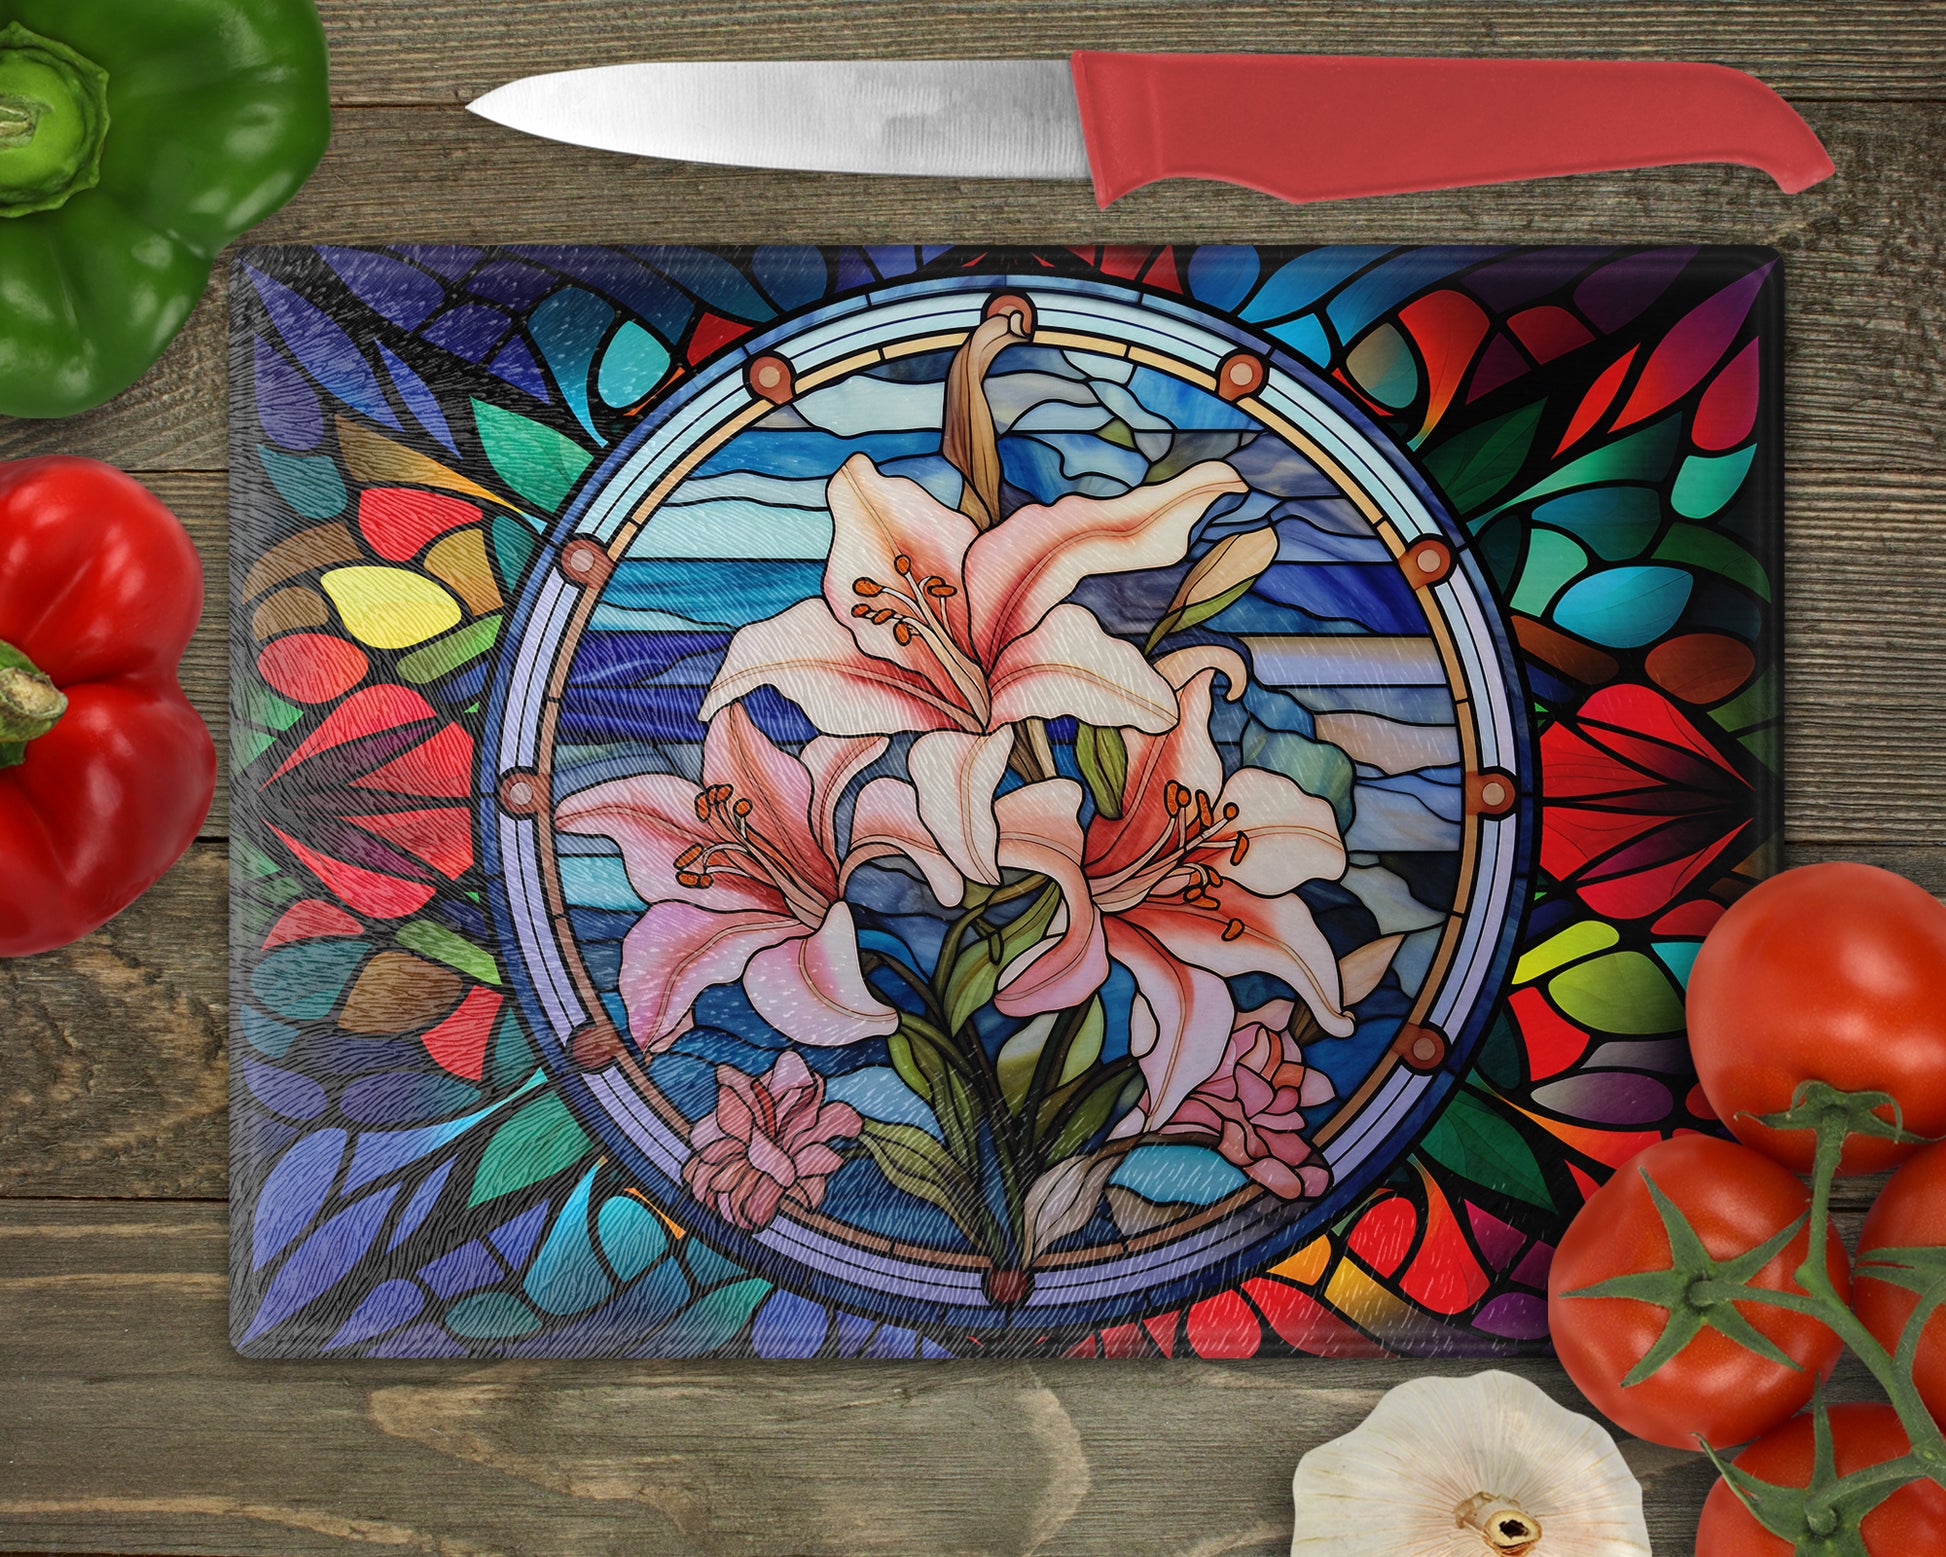 a cutting board with a painting of flowers on it